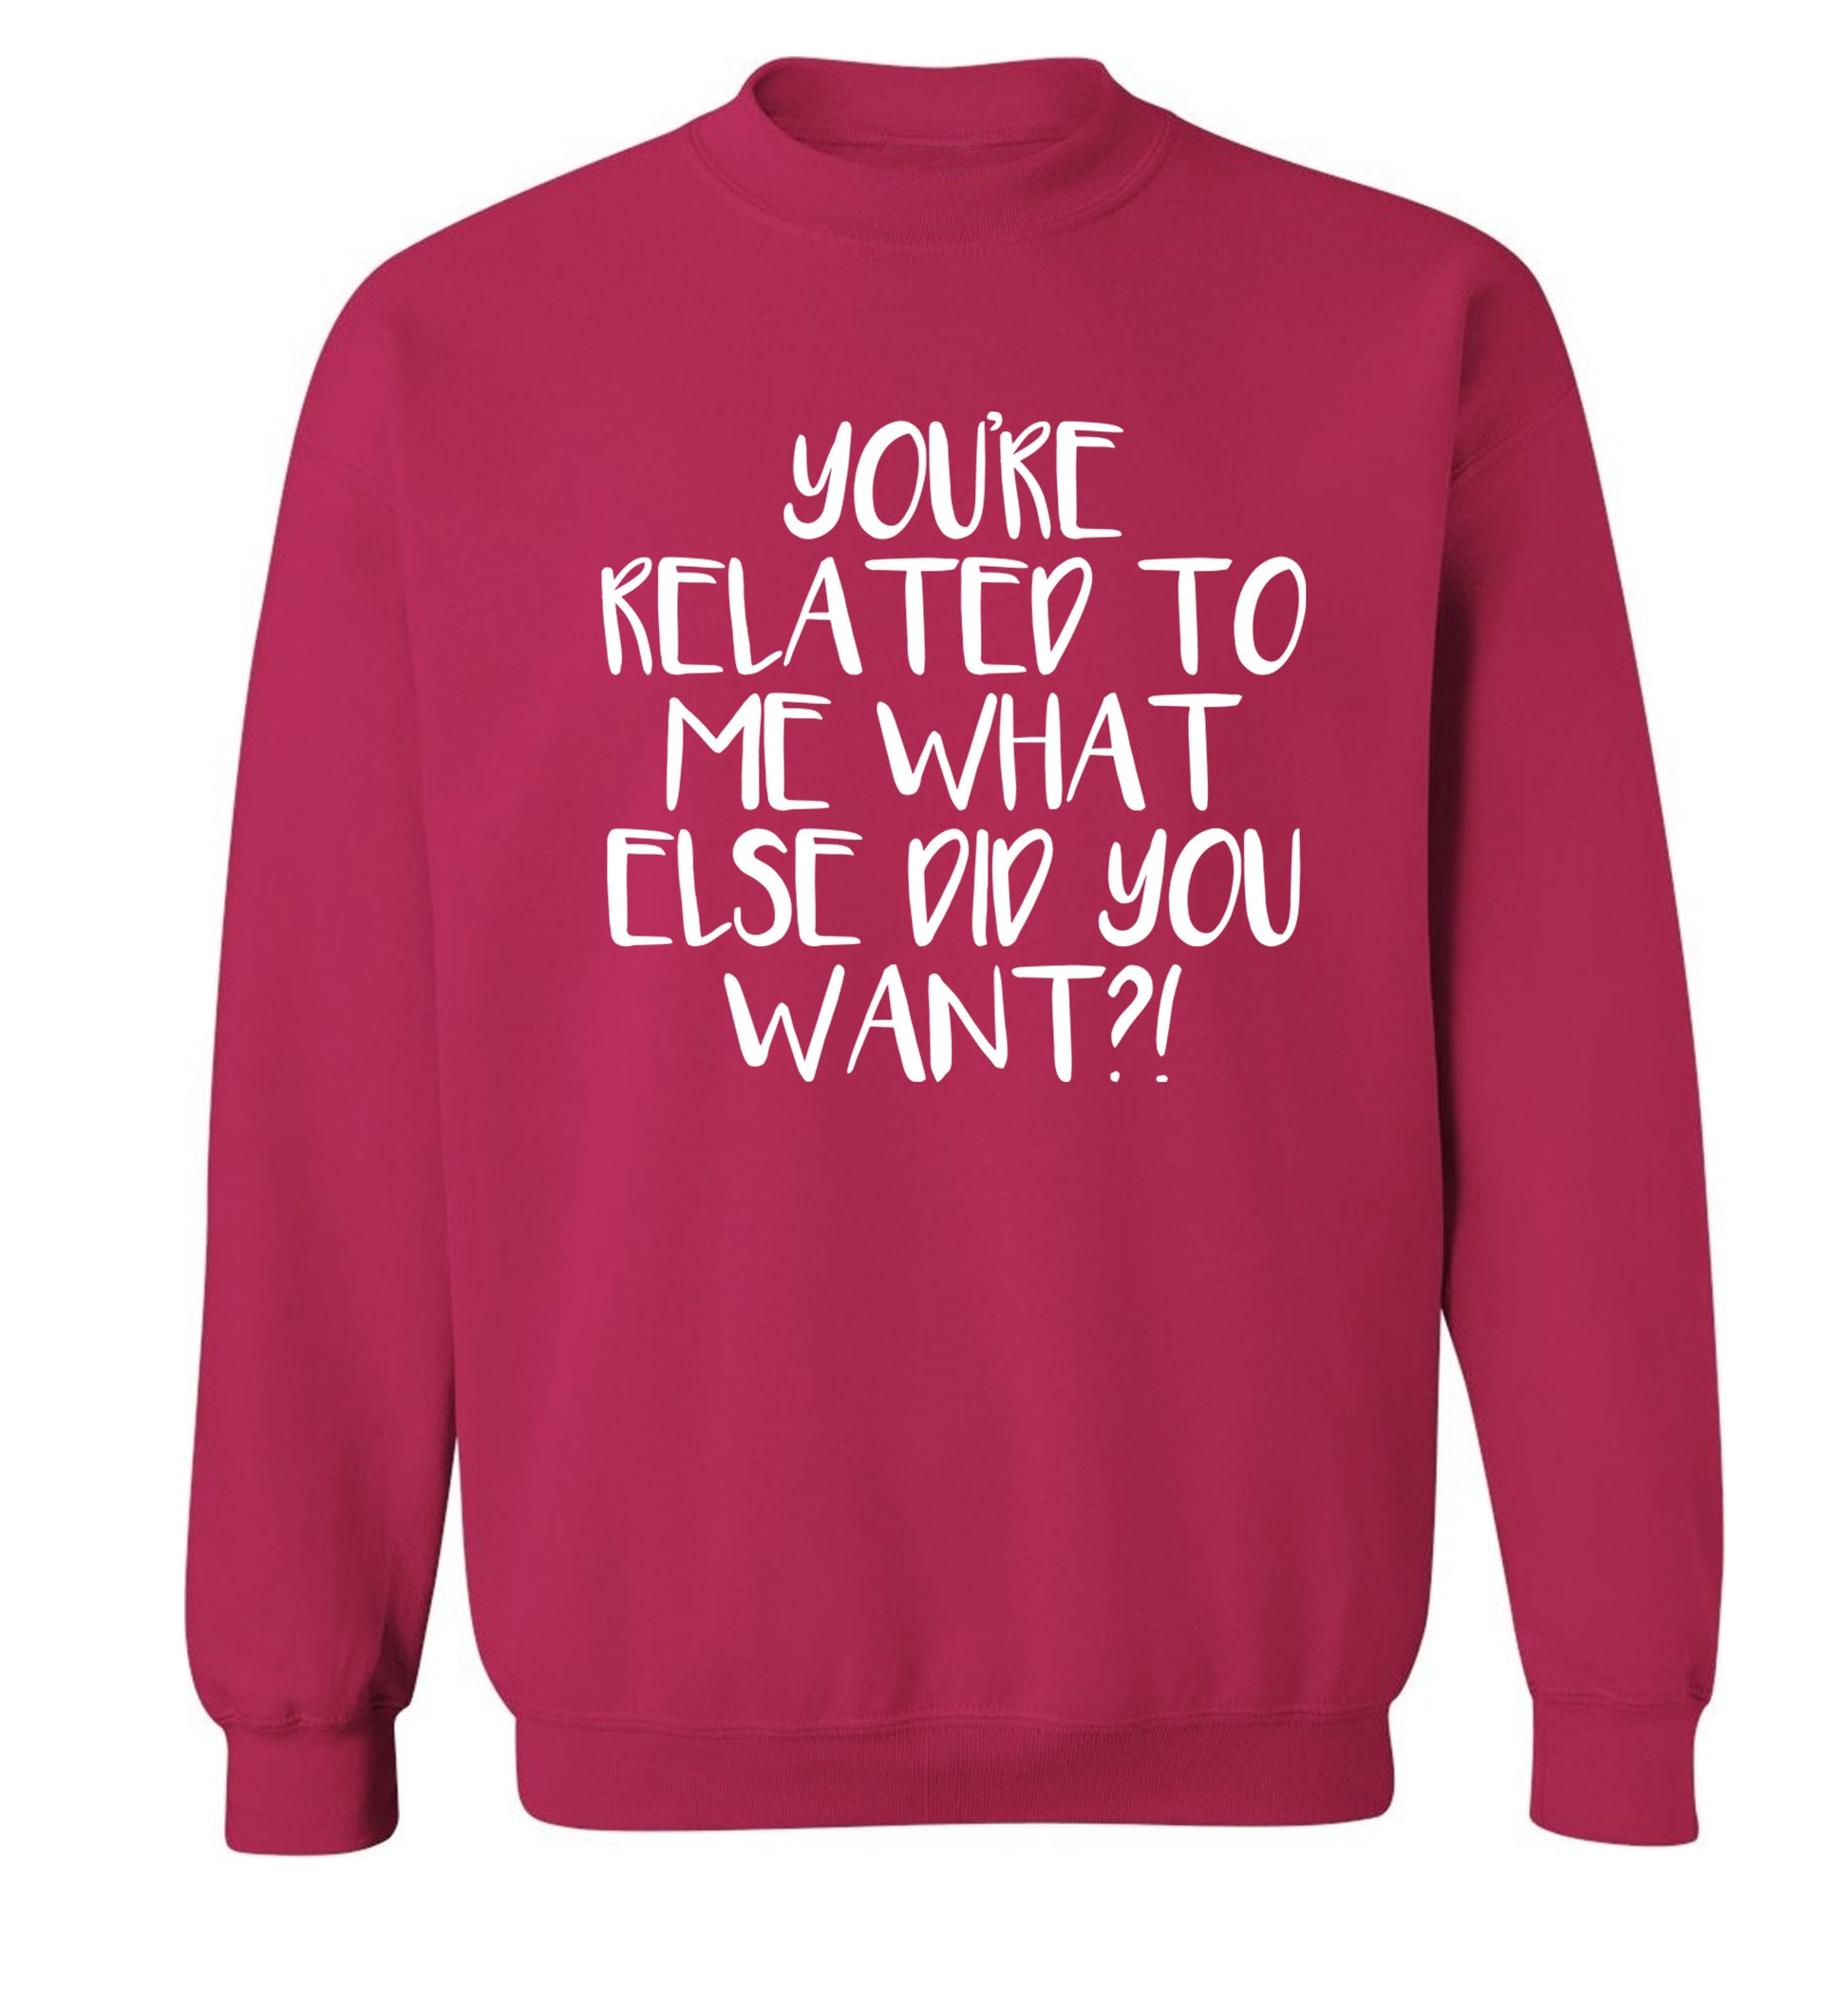 You're related to me what more do you want? Adult's unisex pink Sweater 2XL